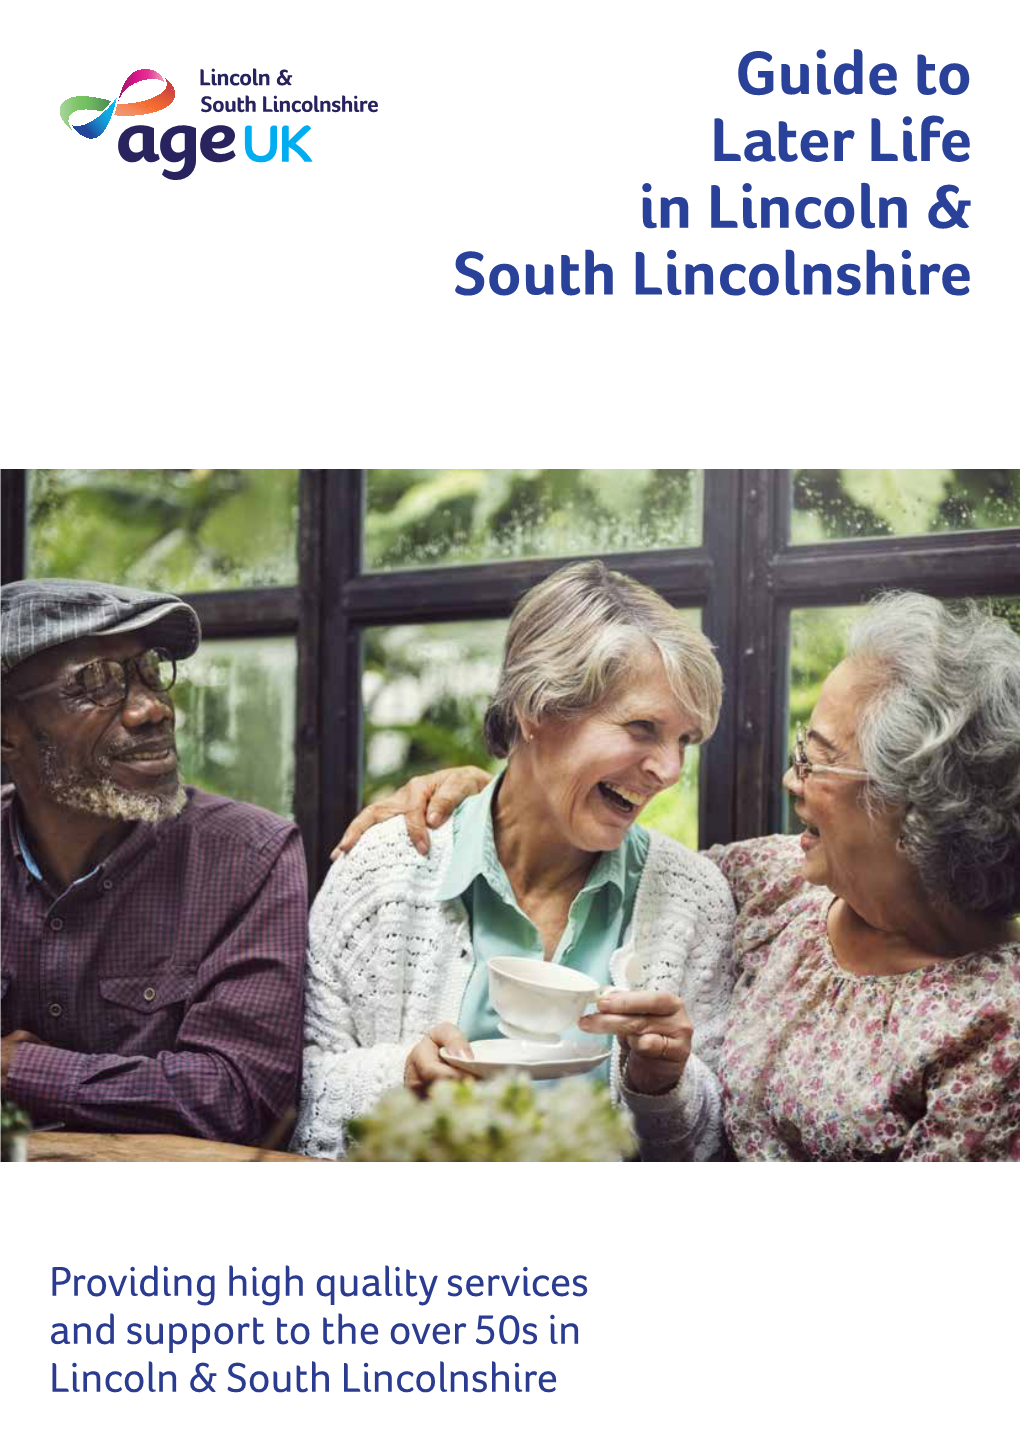 Guide to Later Life in Lincoln & South Lincolnshire